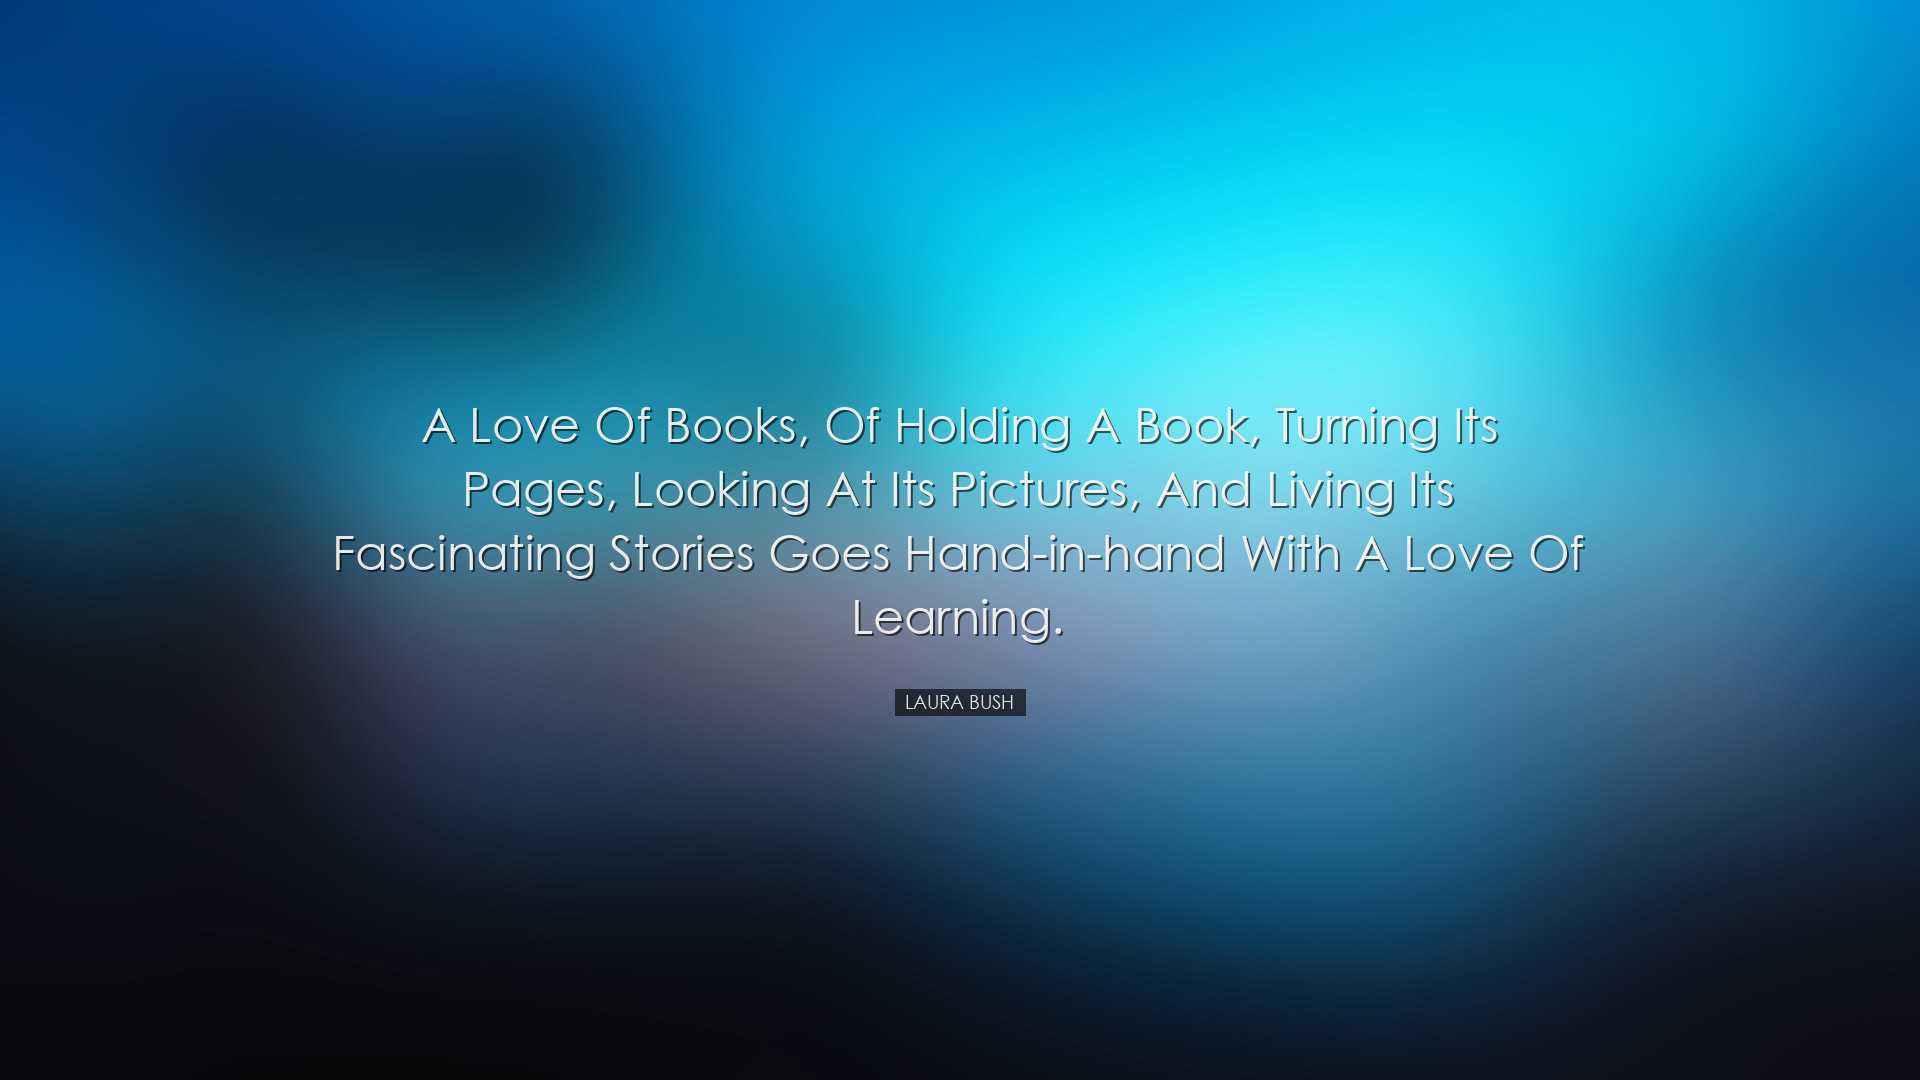 A love of books, of holding a book, turning its pages, looking at